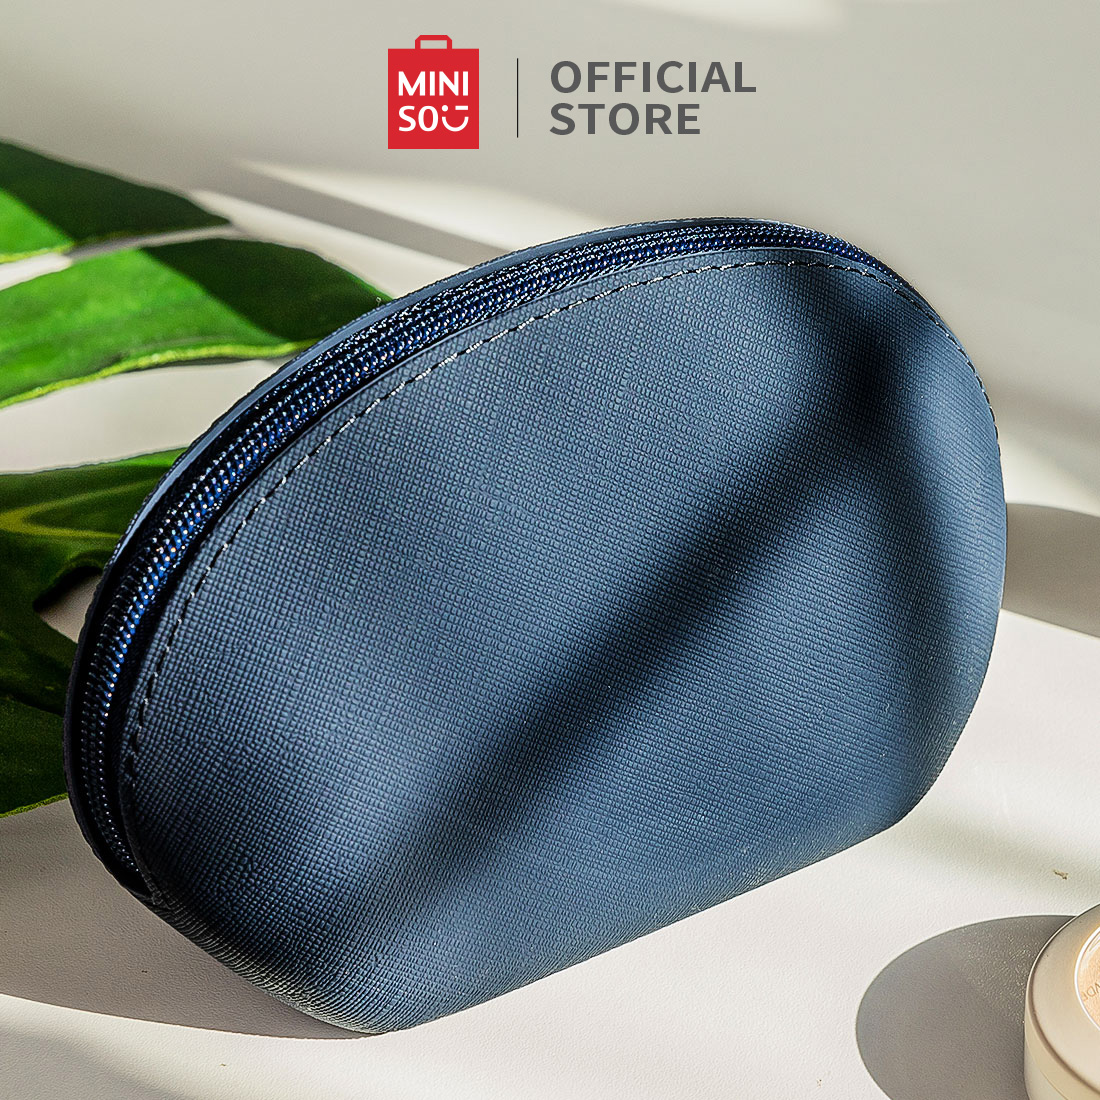 MINISO Candy Silicone Shell Cosmetic Bag (Dark Blue)